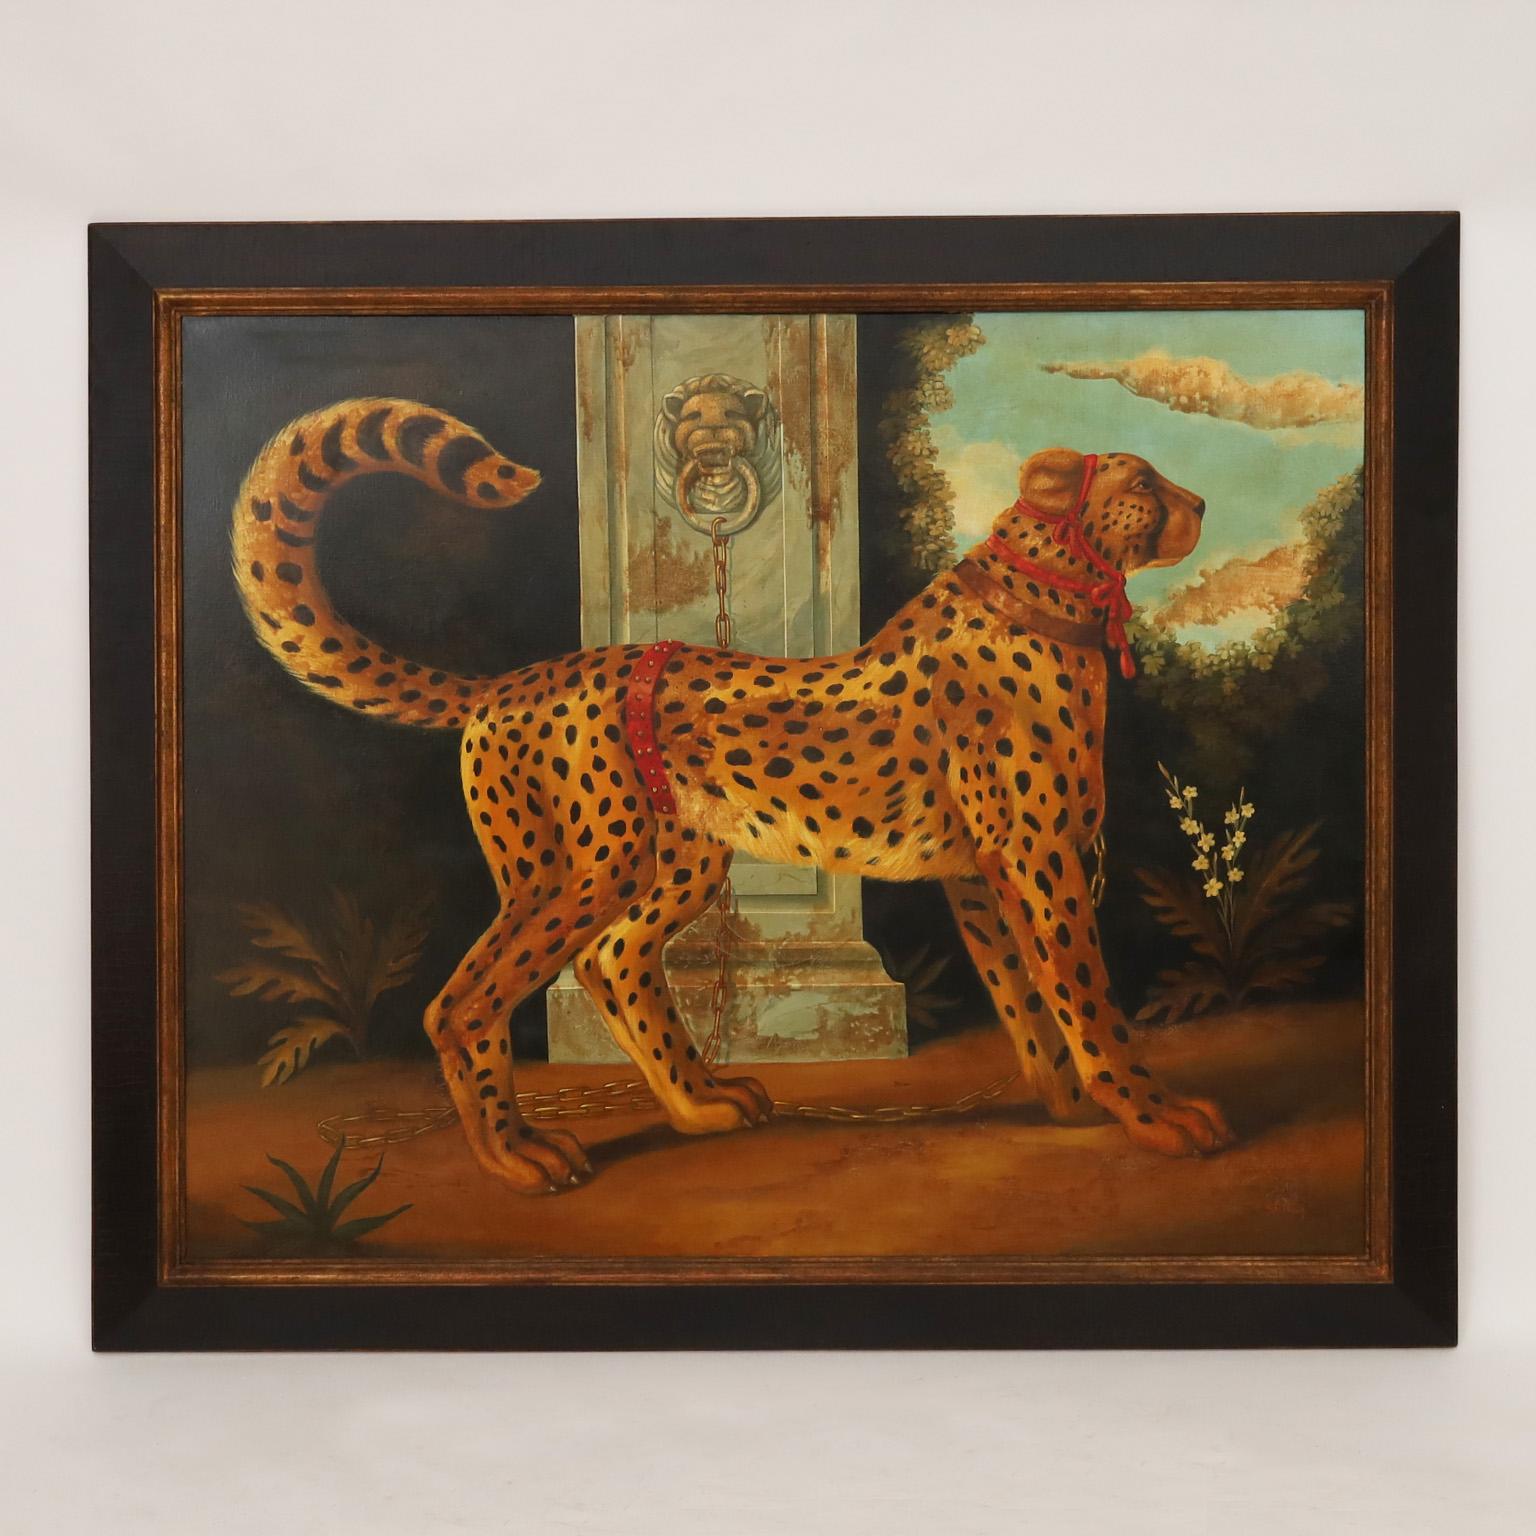 Bold vintage oil painting on canvas of a pet cheetah in a classical setting executed in a tongue in cheek Victorian parlor painting style with contrived aging. Signed Skilling in the lower right and presented in the original wood frame.